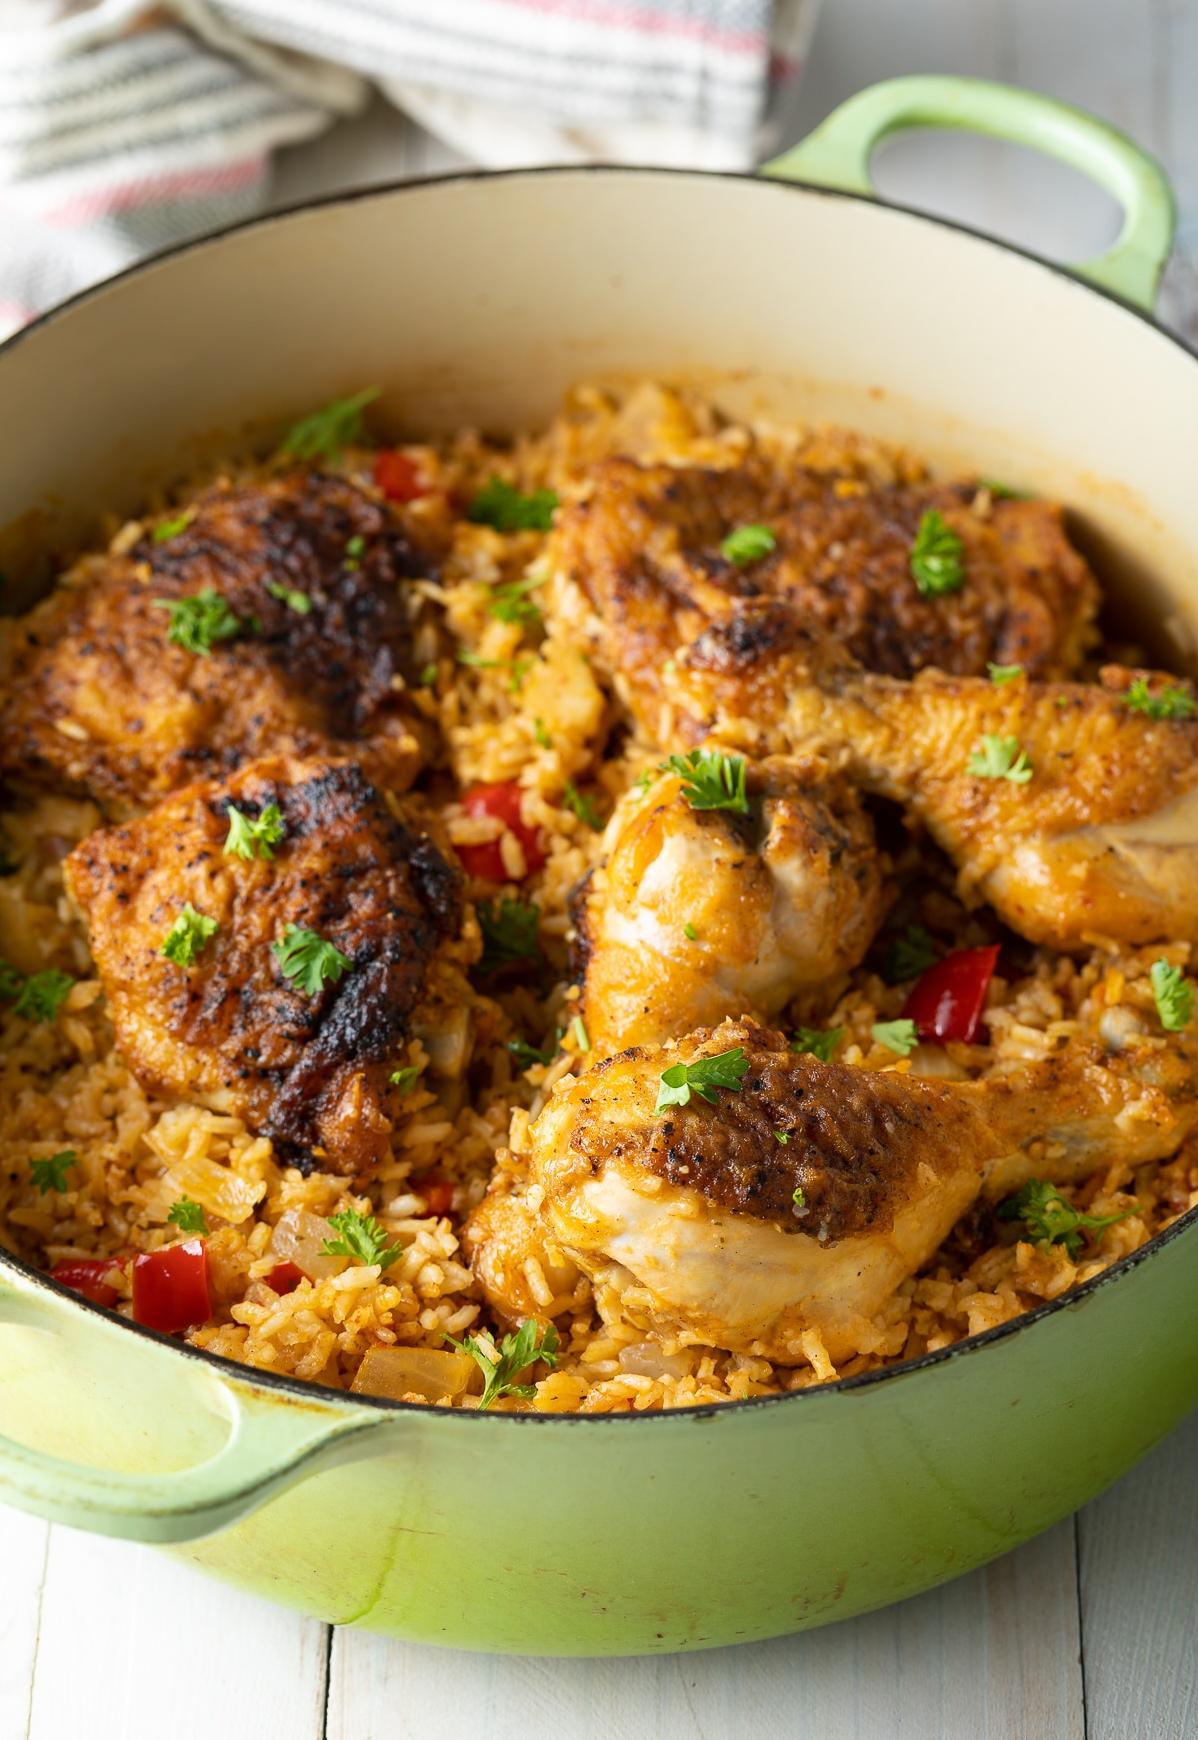  Just one bite of this arroz con pollo, and you'll be hooked for life.